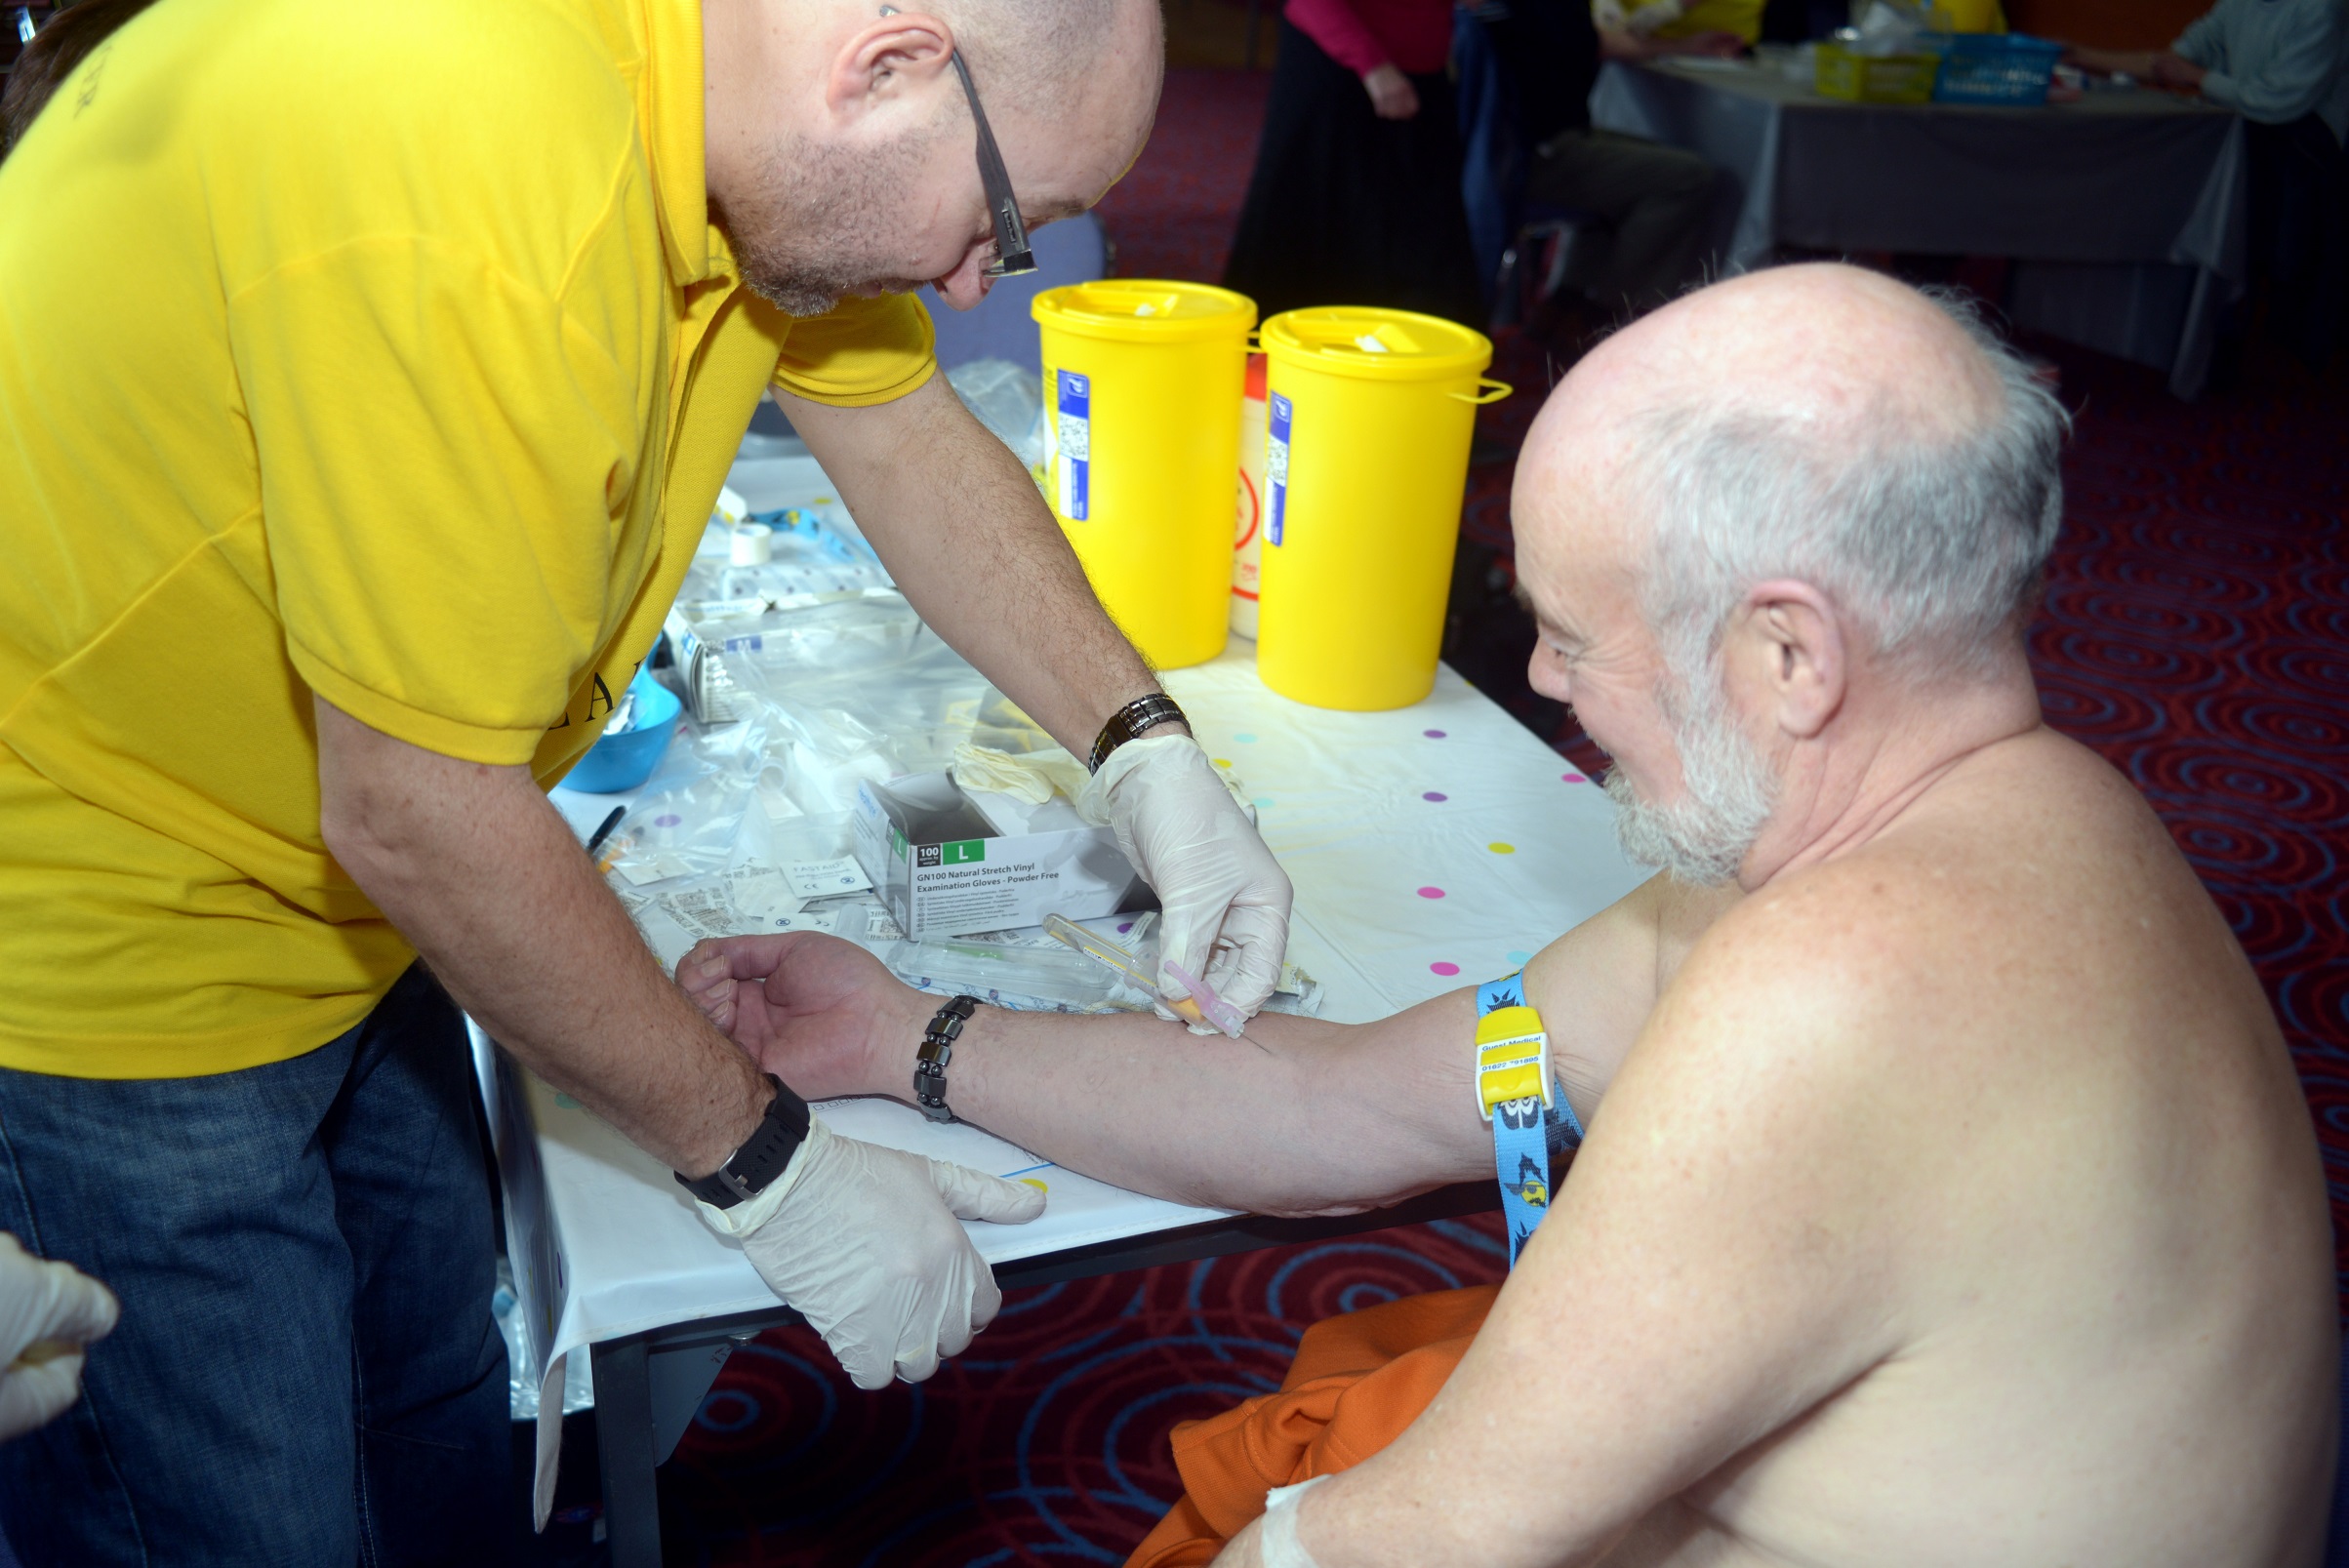 An elderly man at a prostate cancer testing event